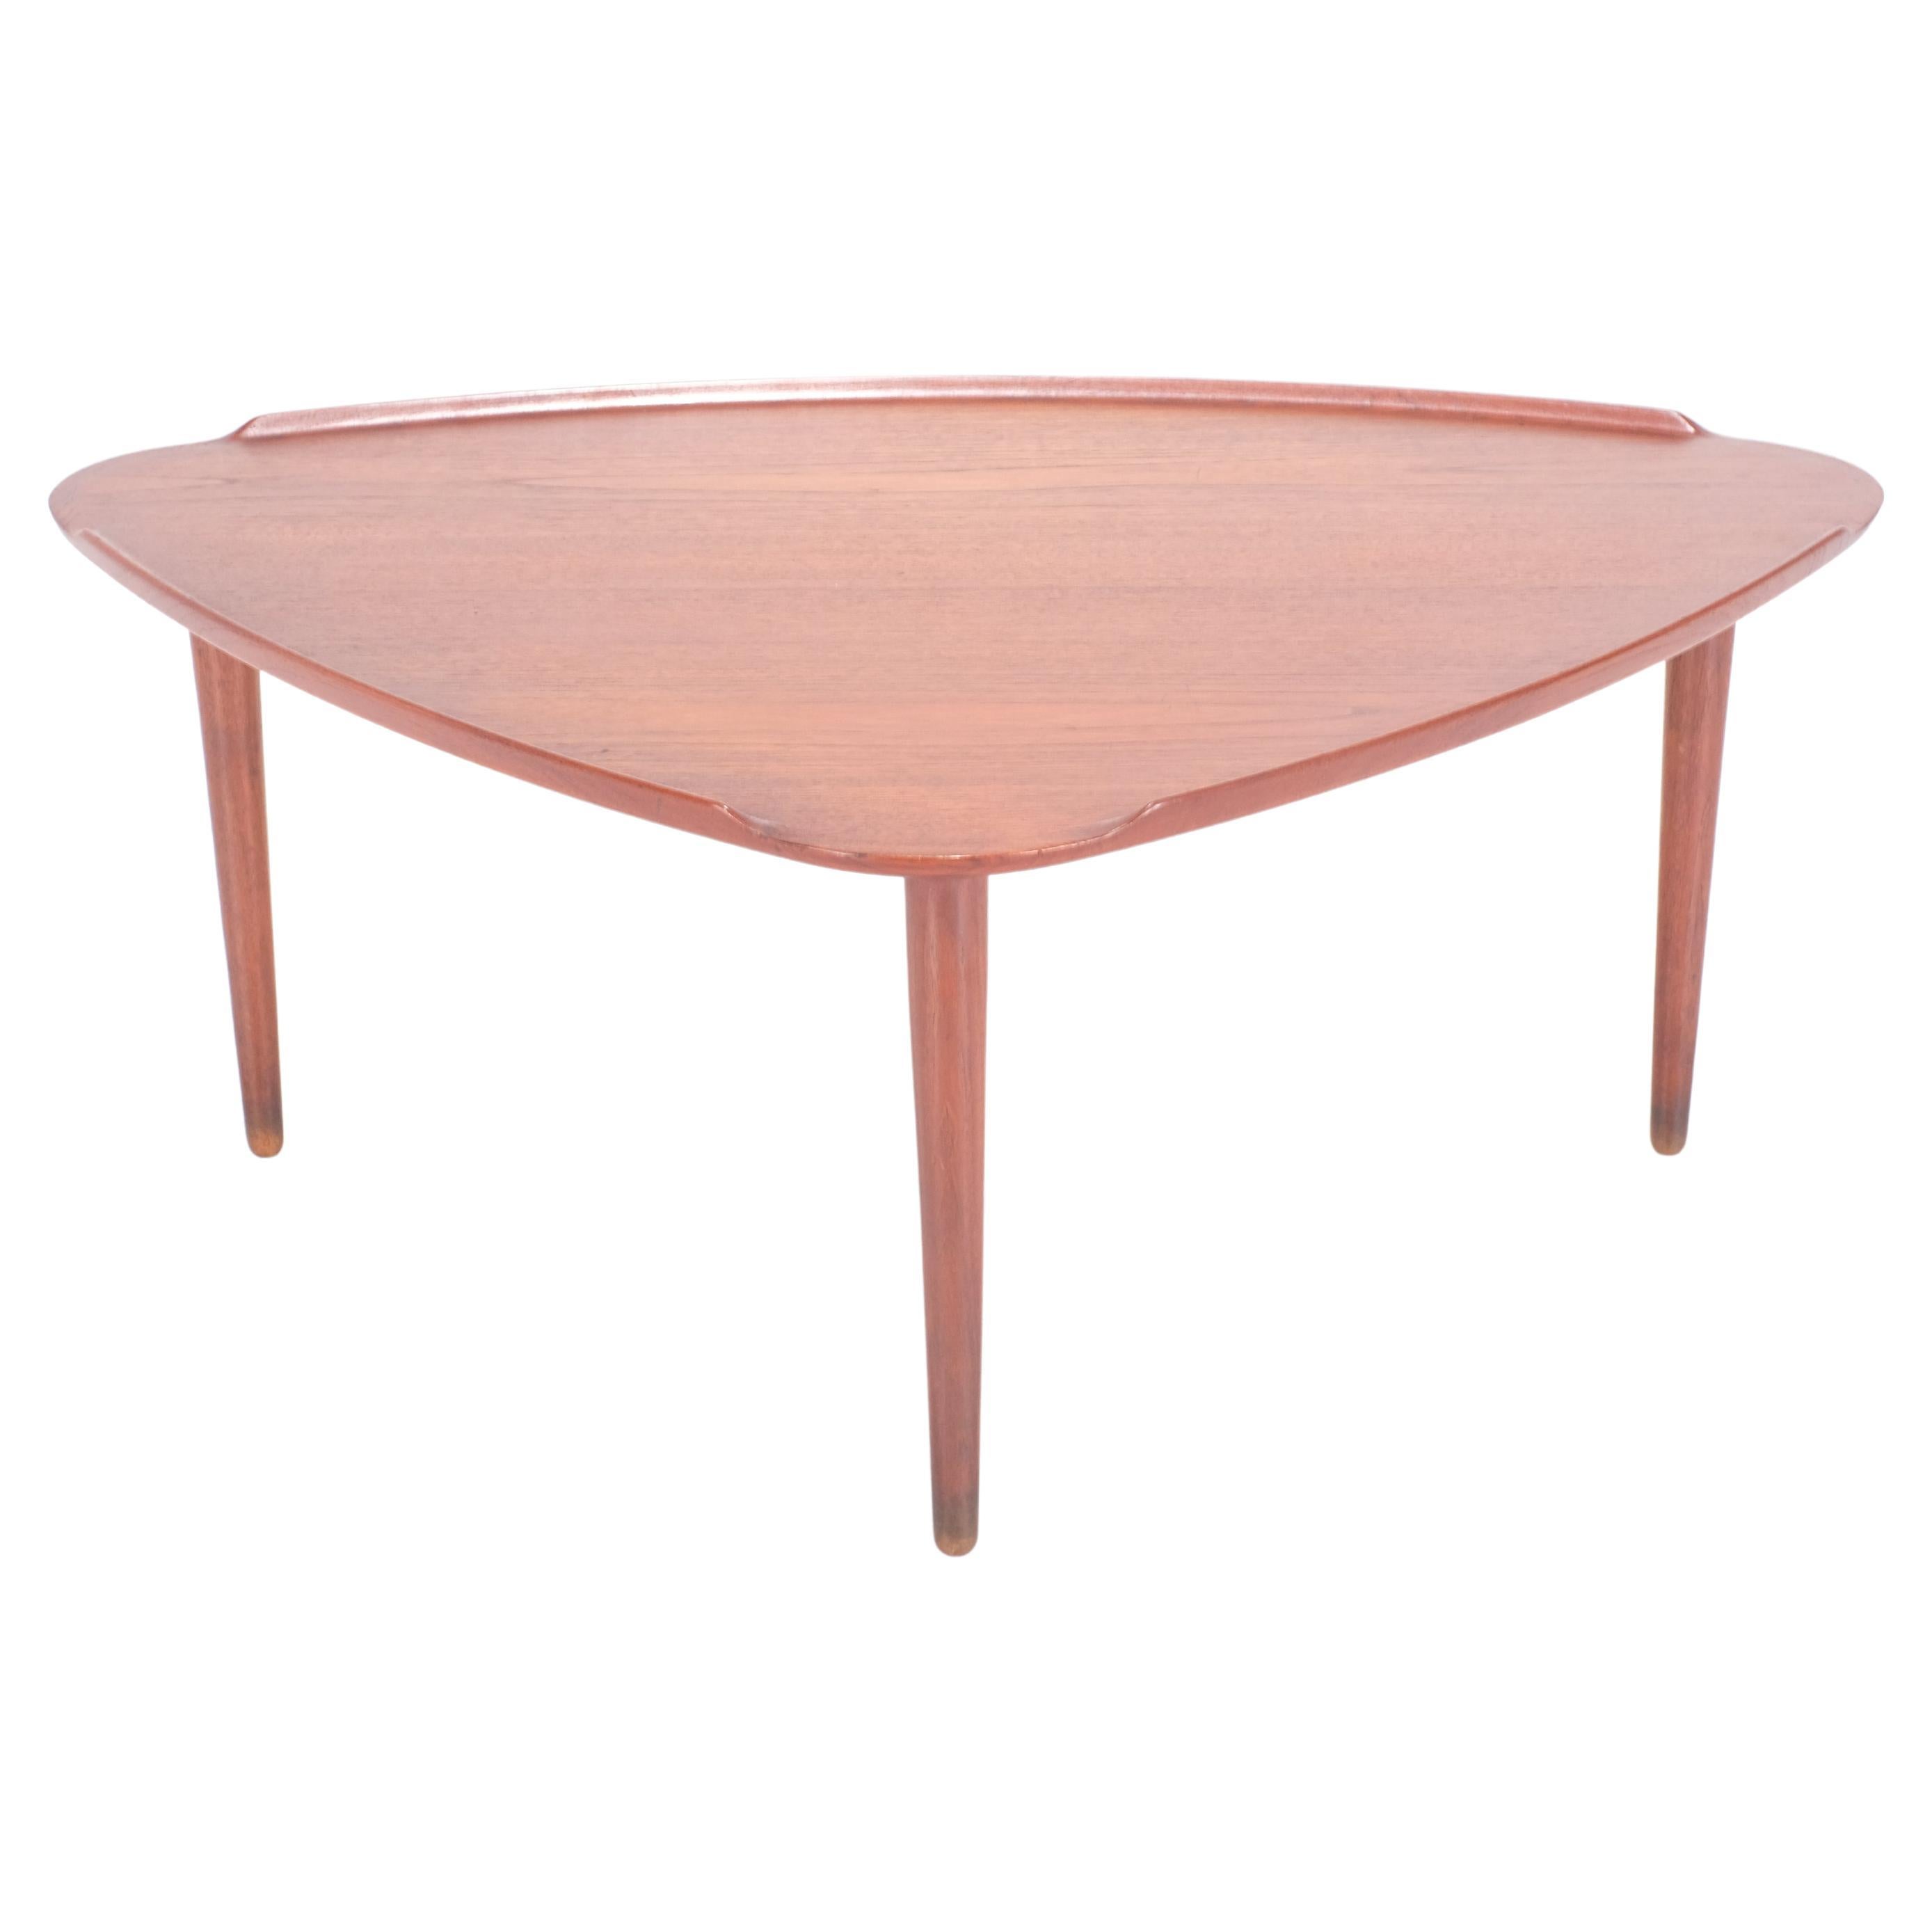 Amazing coffee table by Aakjaer Jorgensen for Bramminge - 1960s For Sale